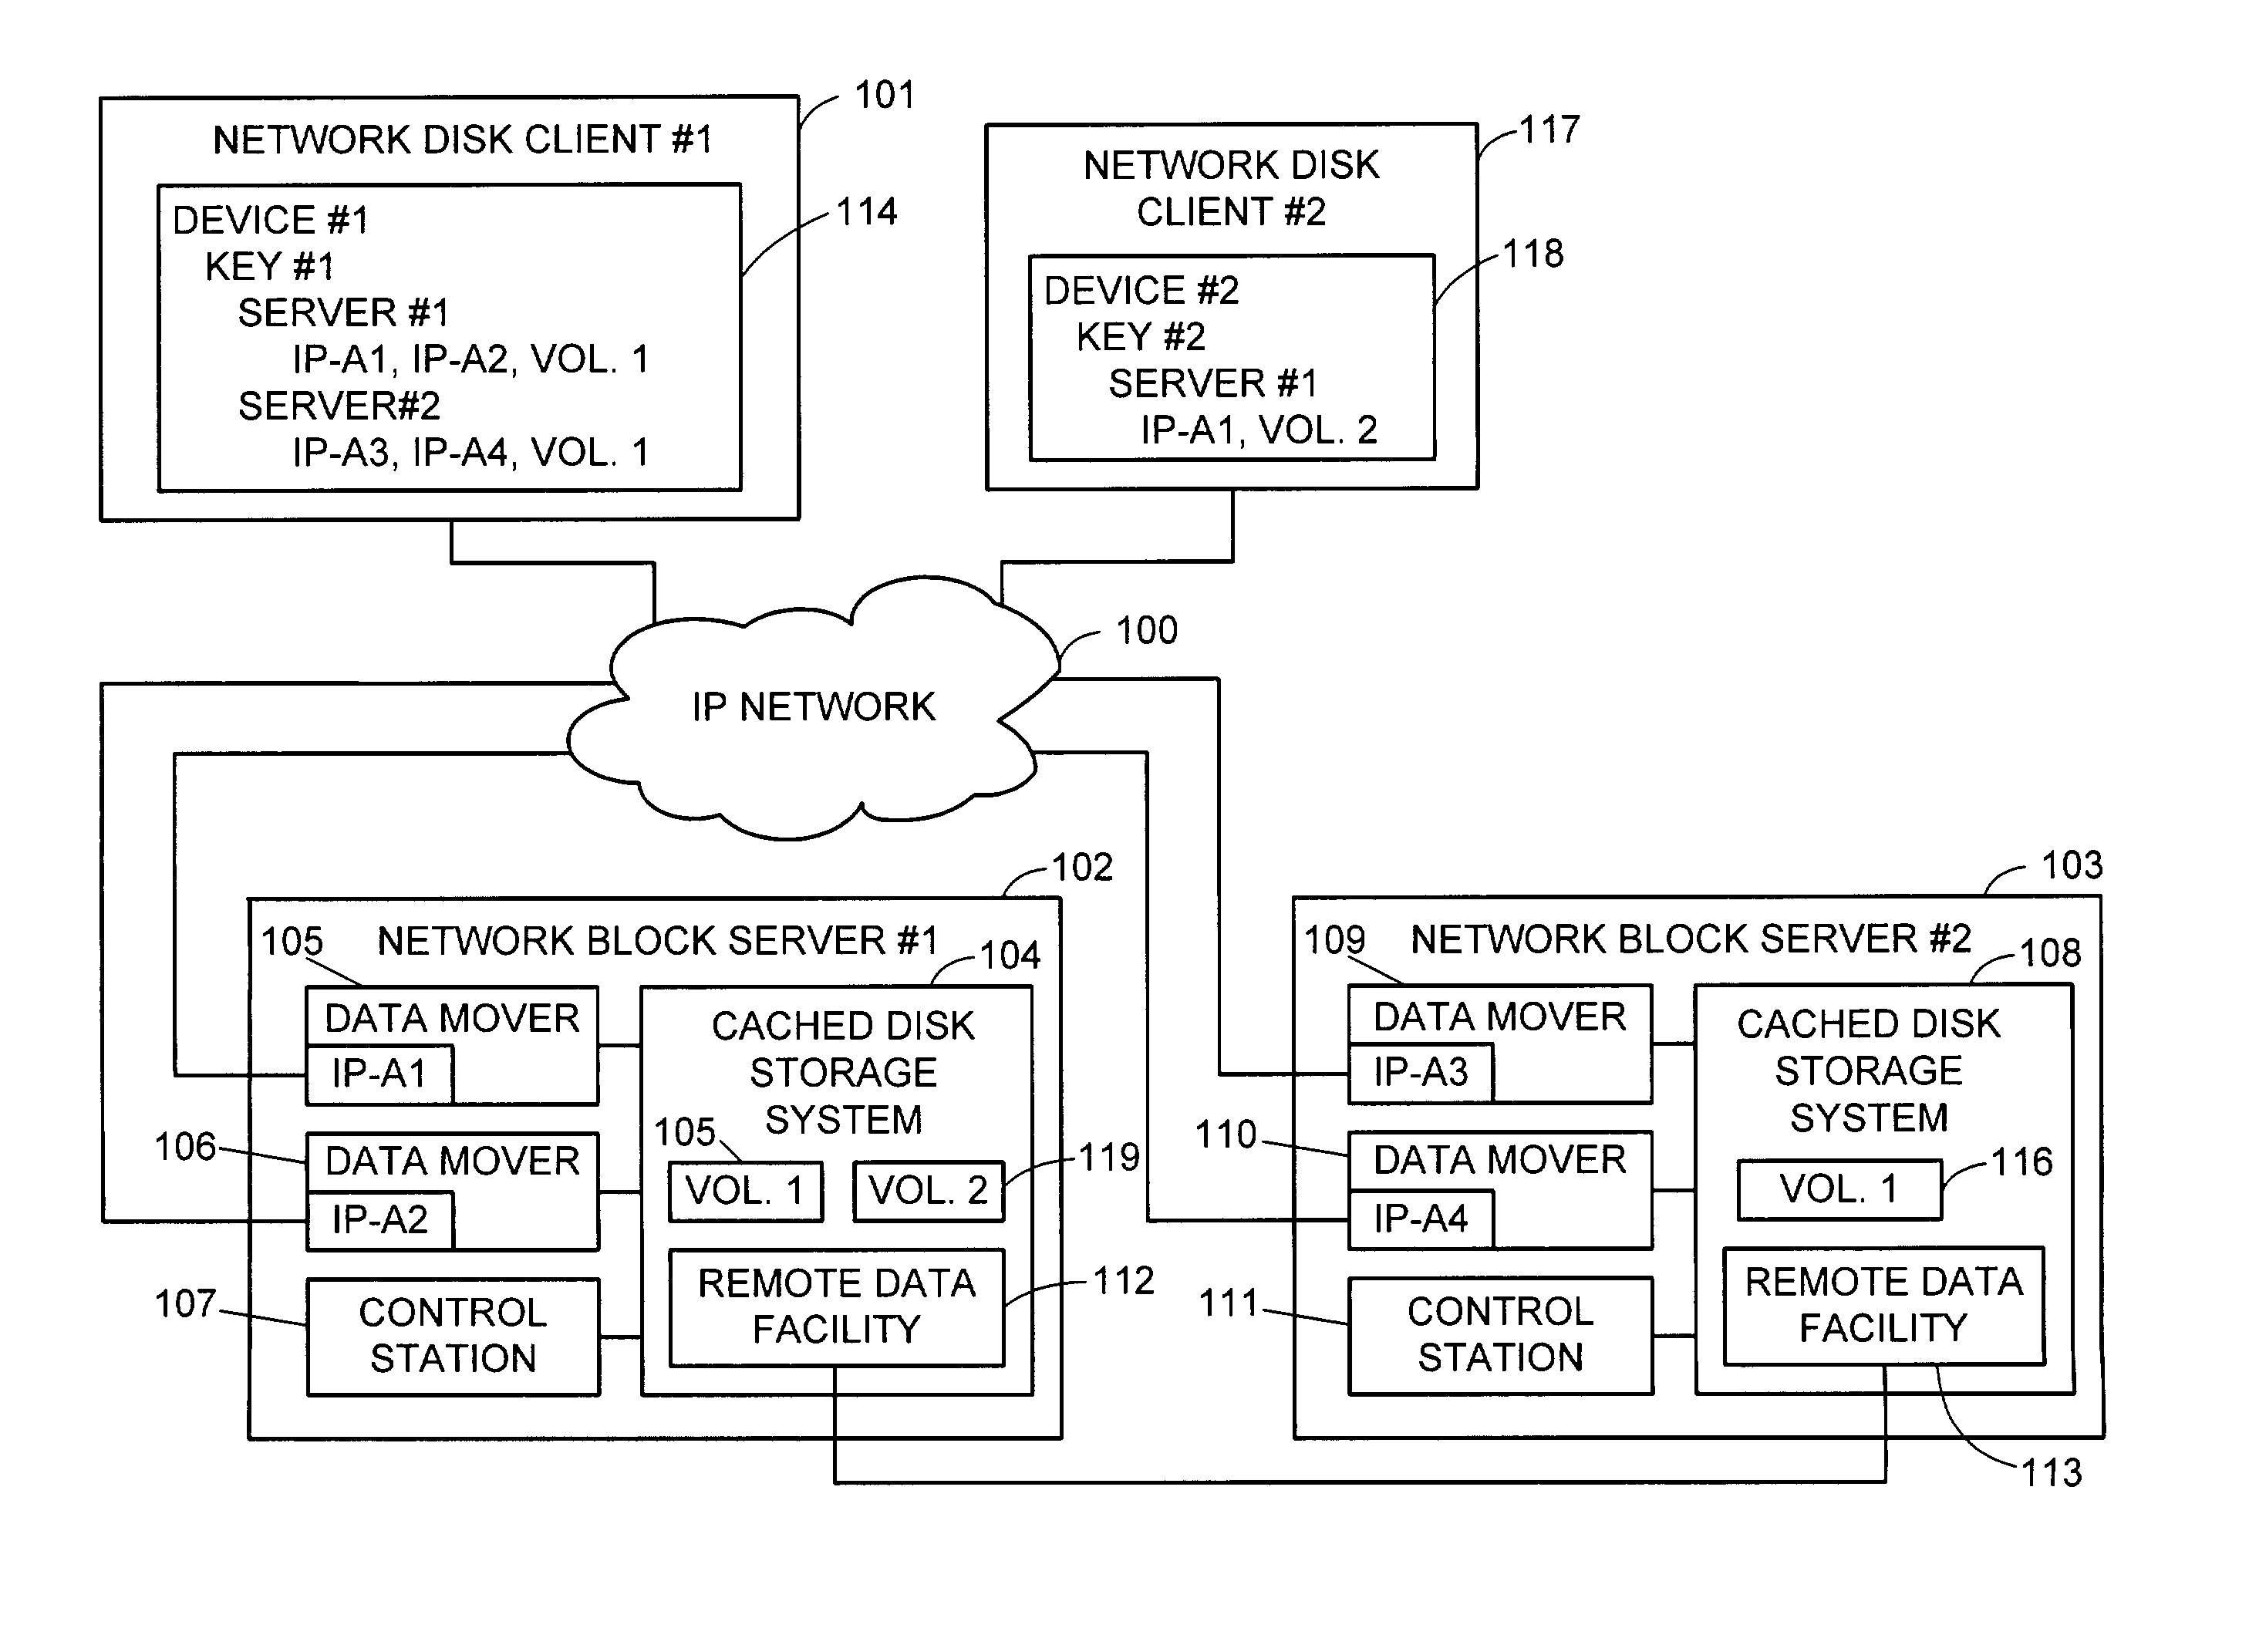 Network block services for client access of network-attached data storage in an IP network